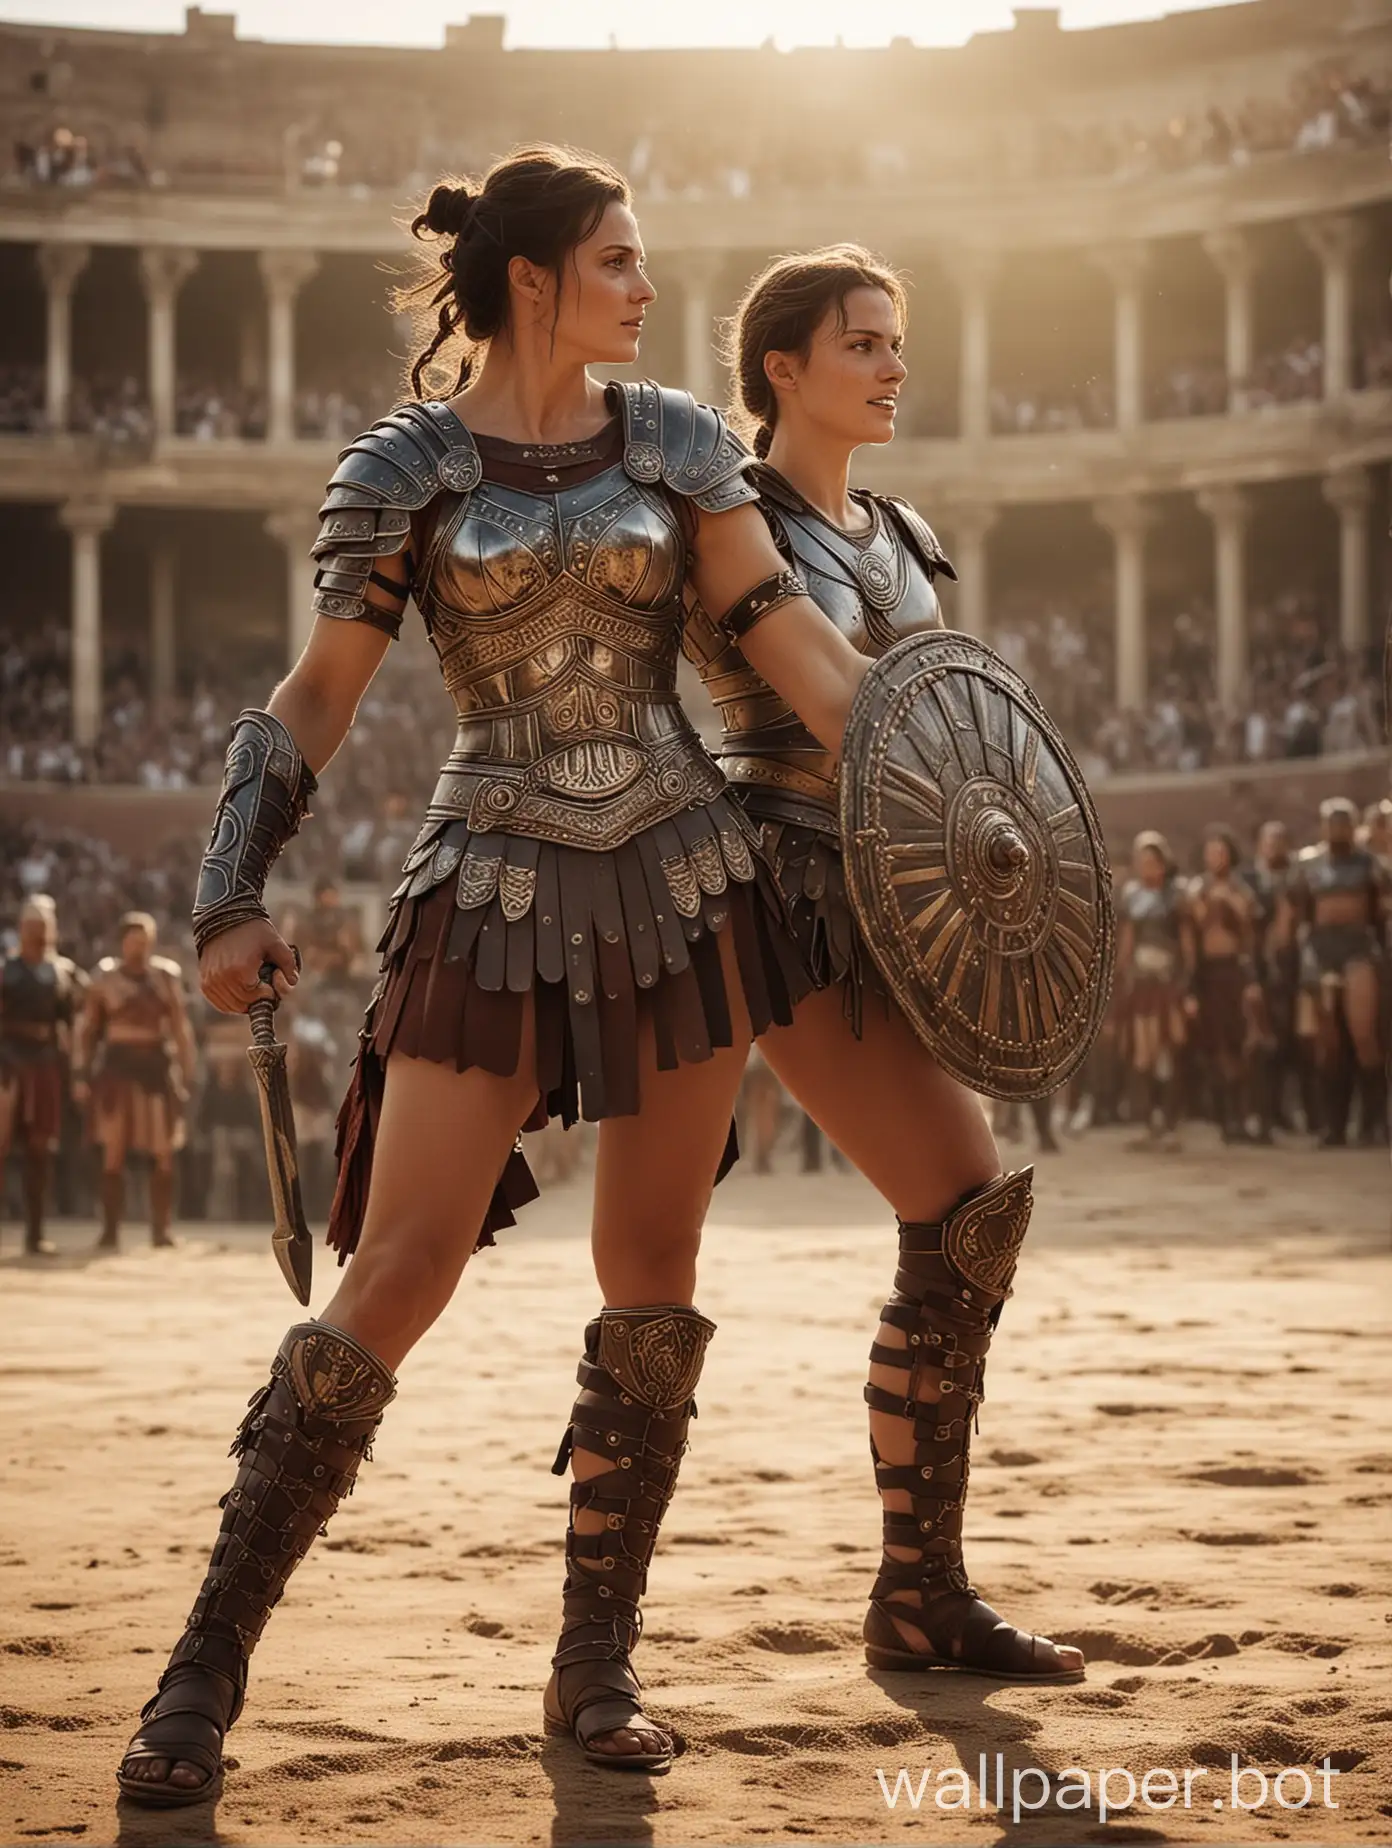 A stunning cinematic photo set in a brightly lit, ancient gladiatorial arena. A beautiful, mature, and muscular female gladiator triumphs over her defeated opponent. She stands in a victorious pose, with one leg on the chest of her rival, exuding both strength and confidence. Her armor is adorned with intricate designs, and her triumphant smile radiates a glint of evil satisfaction. The background reveals a cheering crowd, and the atmosphere is intense and electrifying, cinematic, photo